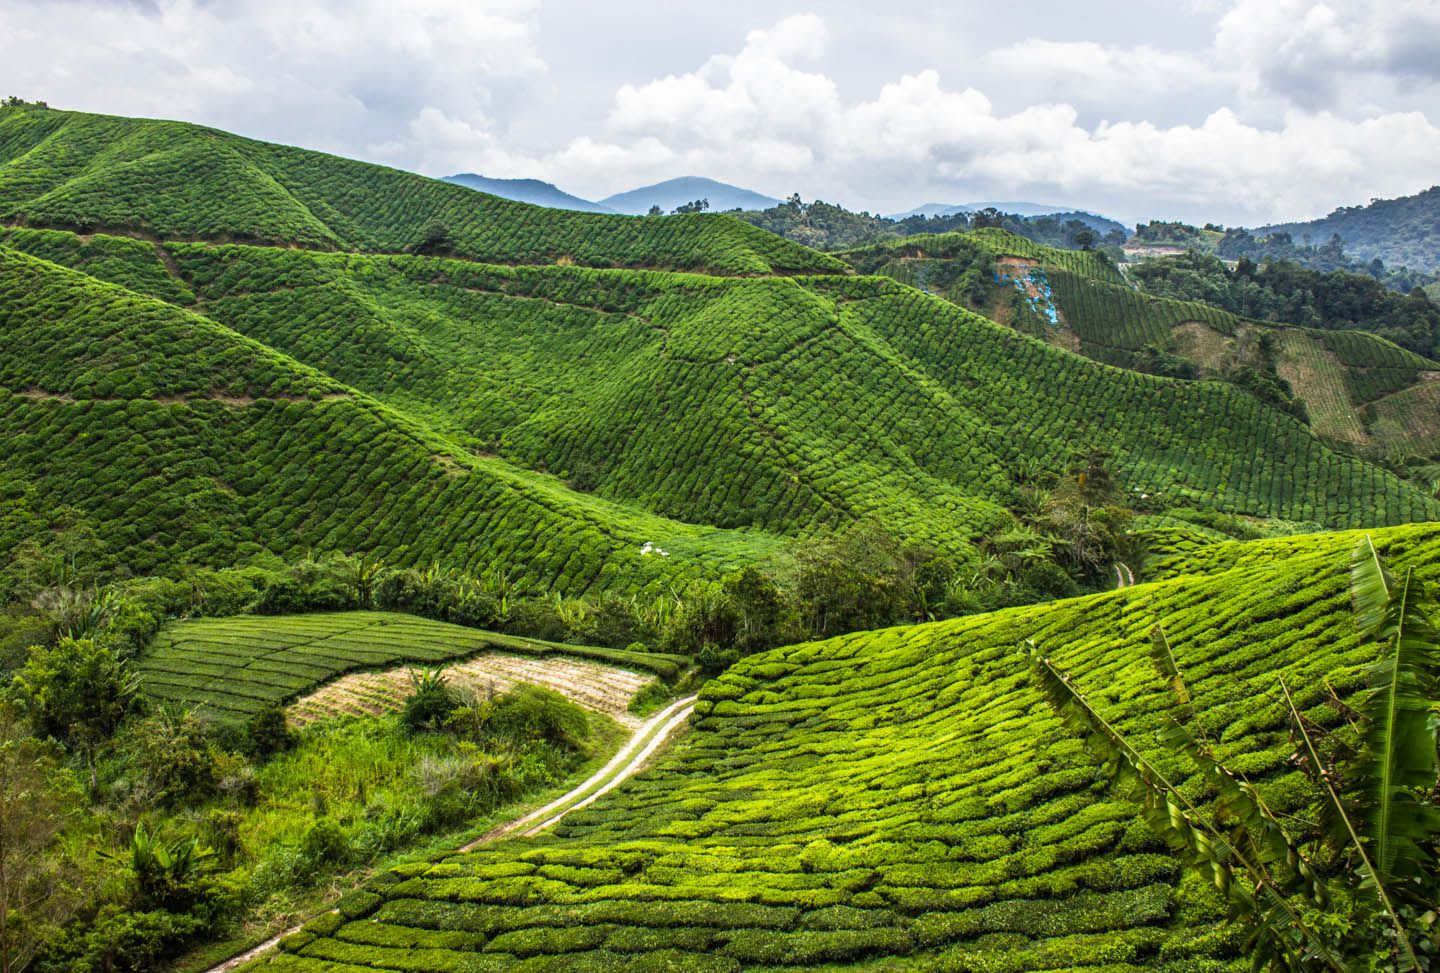 View of the tea plantation from the Boh tea factory, Cameron Highlands, Malaysia